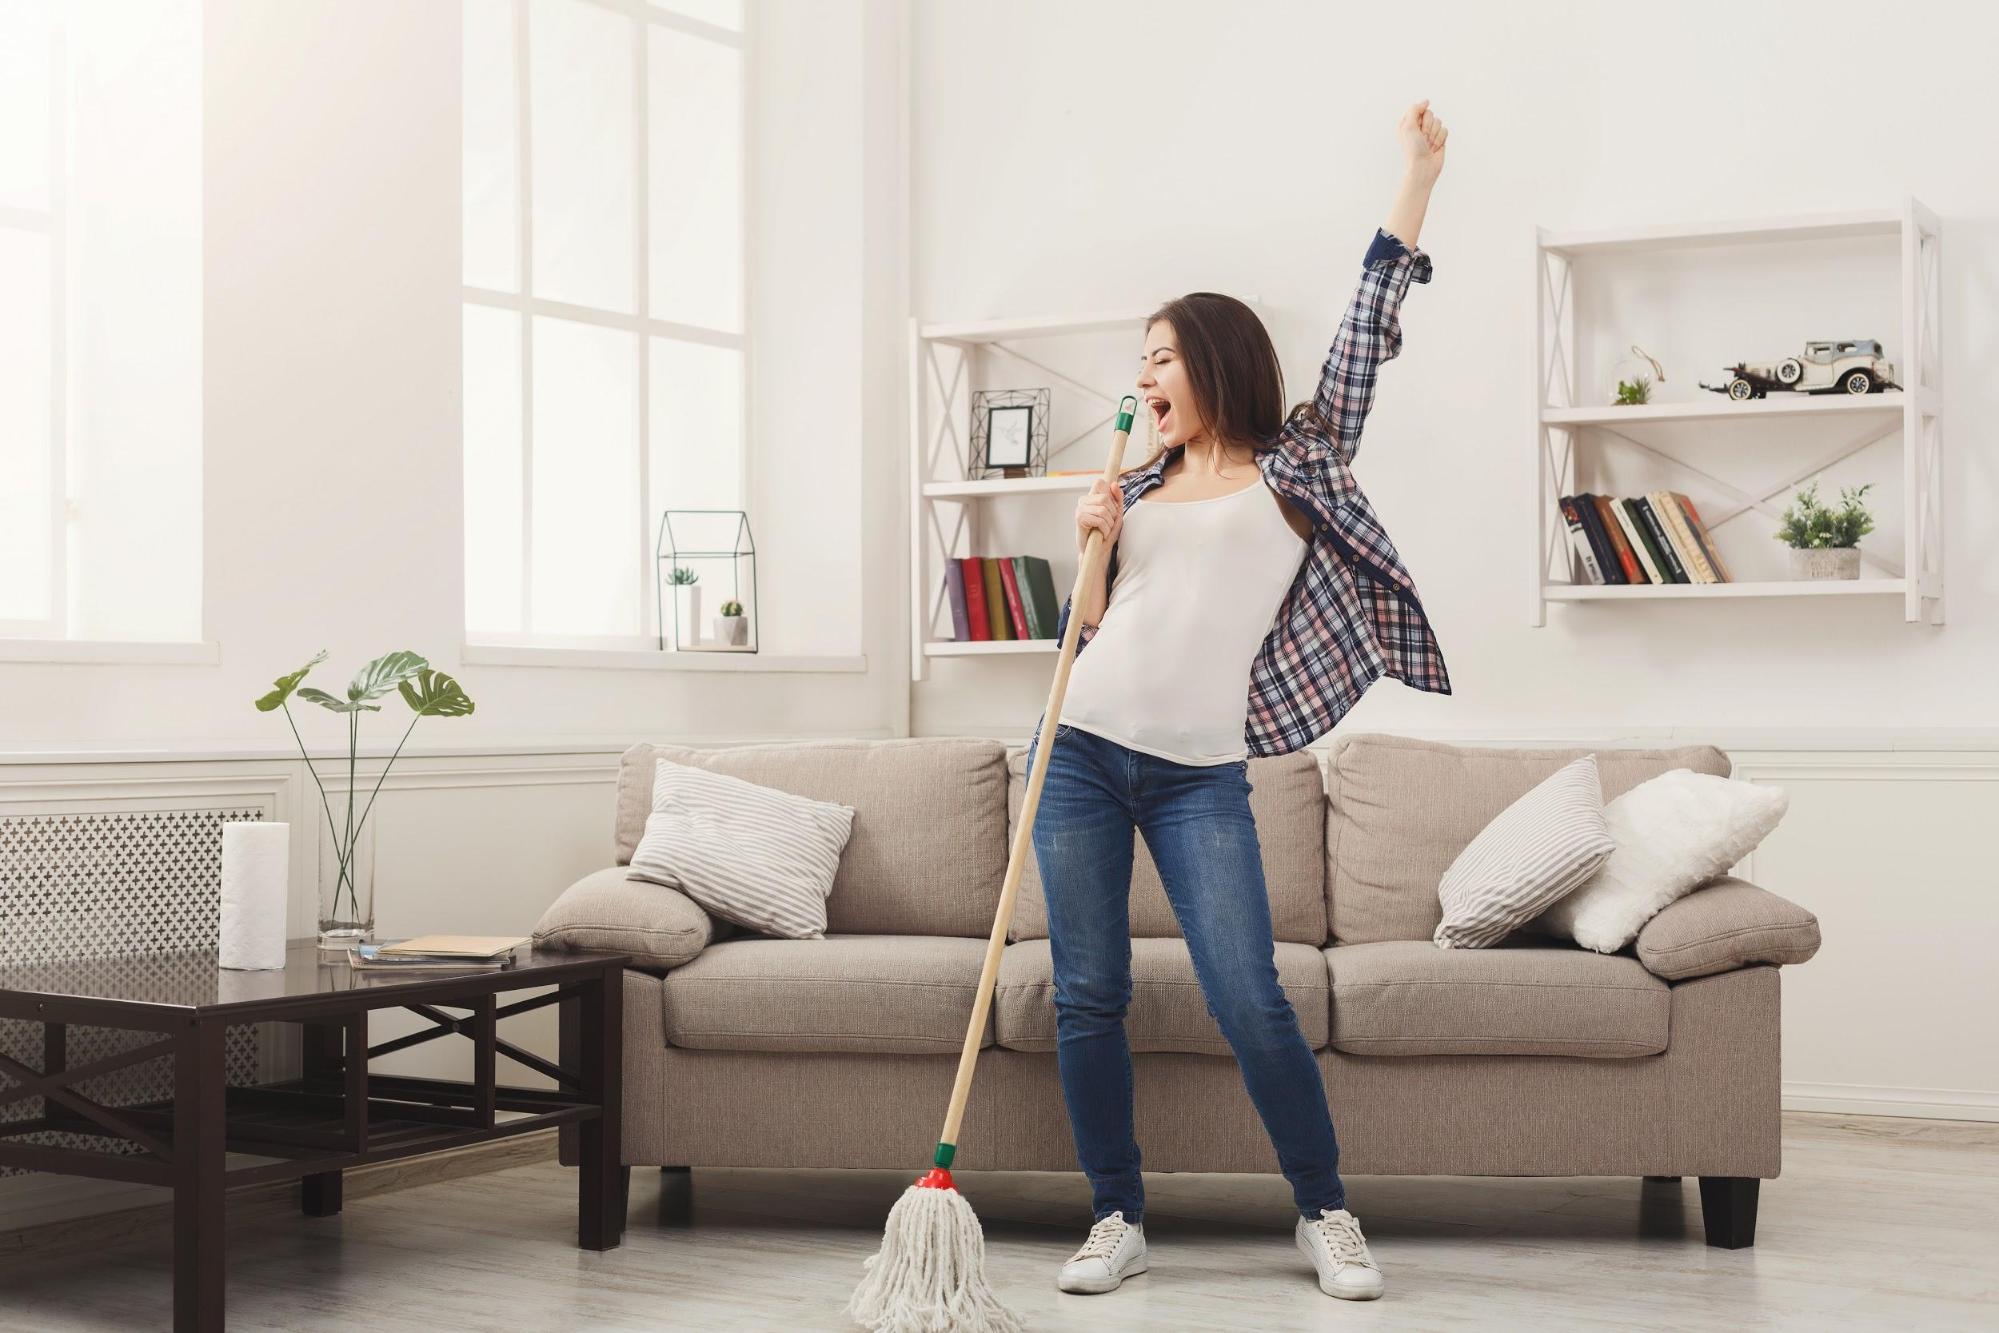 A woman mopping her living room to achieve a fresh home.